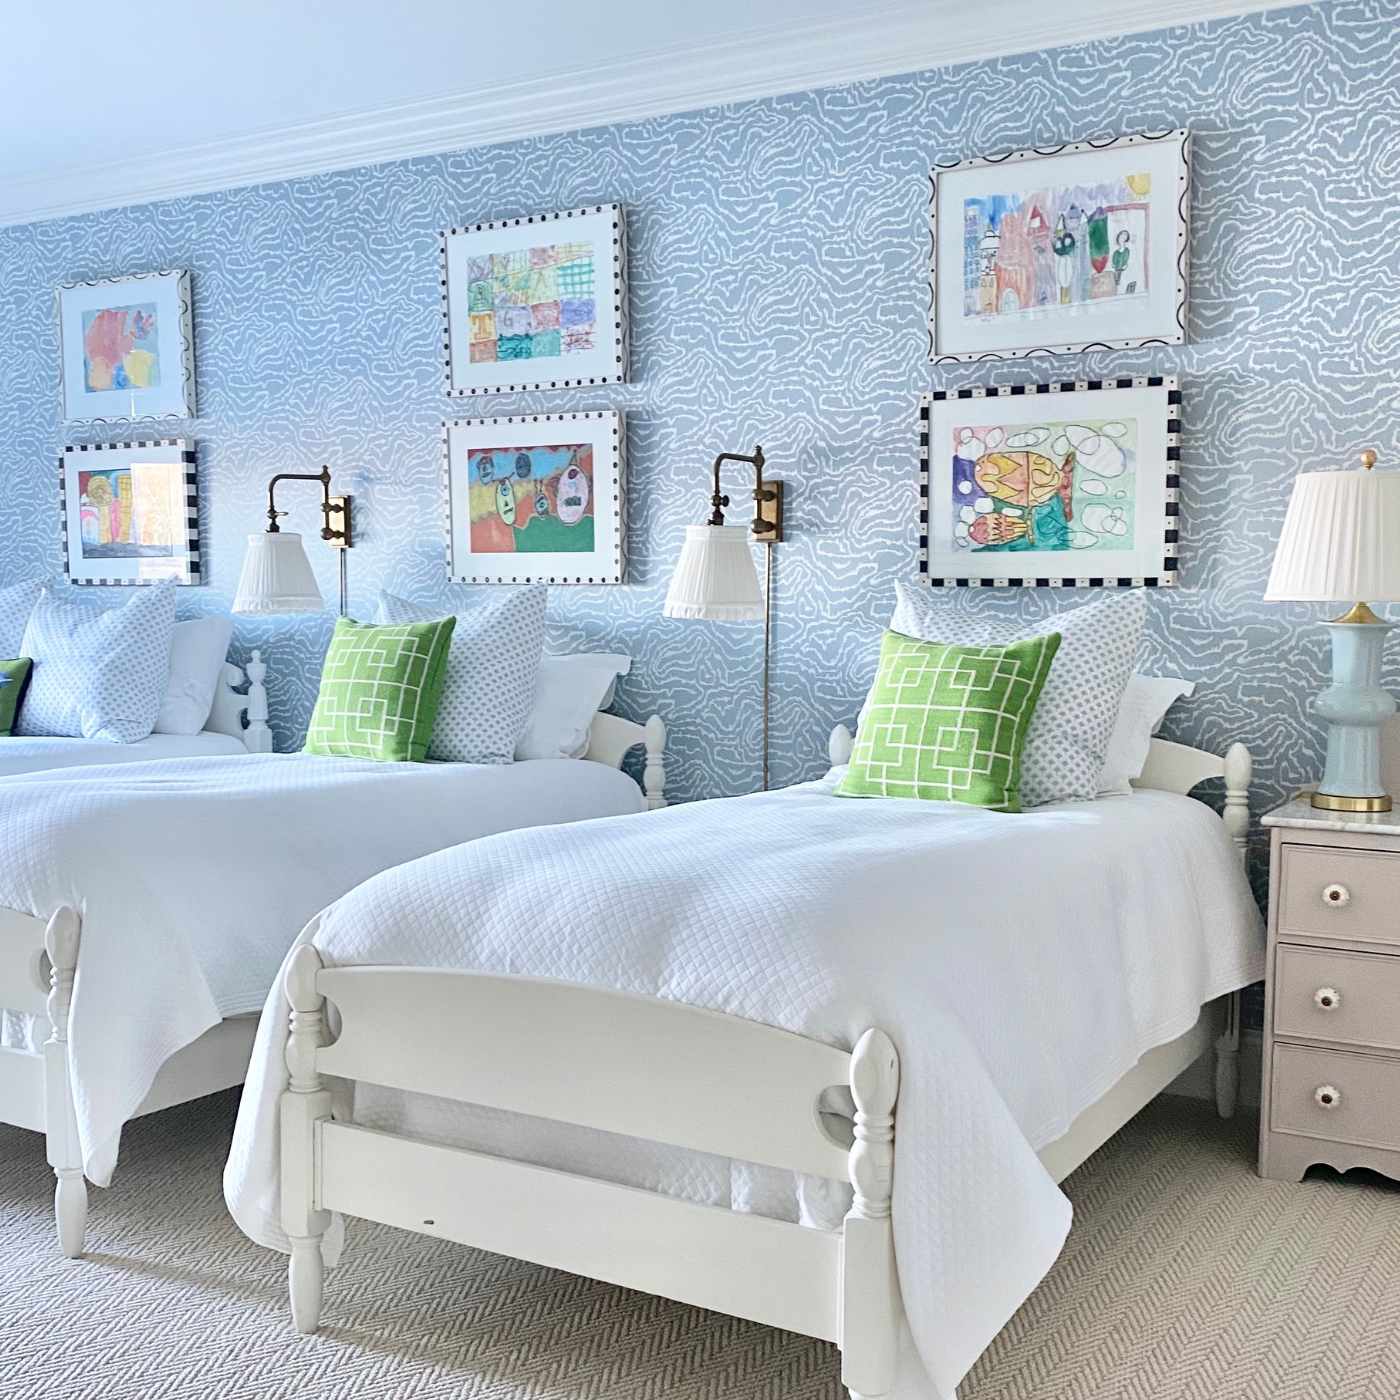 Three white twin beds are next to each other in a bedroom with light purple blue wallpaper with white squiggly lines throughout. Two framed colorful prints are above each of the beds. Two white pillows are on each bed behind a green pillow with a white trellis design. Small bronze lamps with white lampshades are on either side of the middle bed. A small white dresser is to the right of the bed in the foreground, it has a light blue lamp on it with a white lampshade.